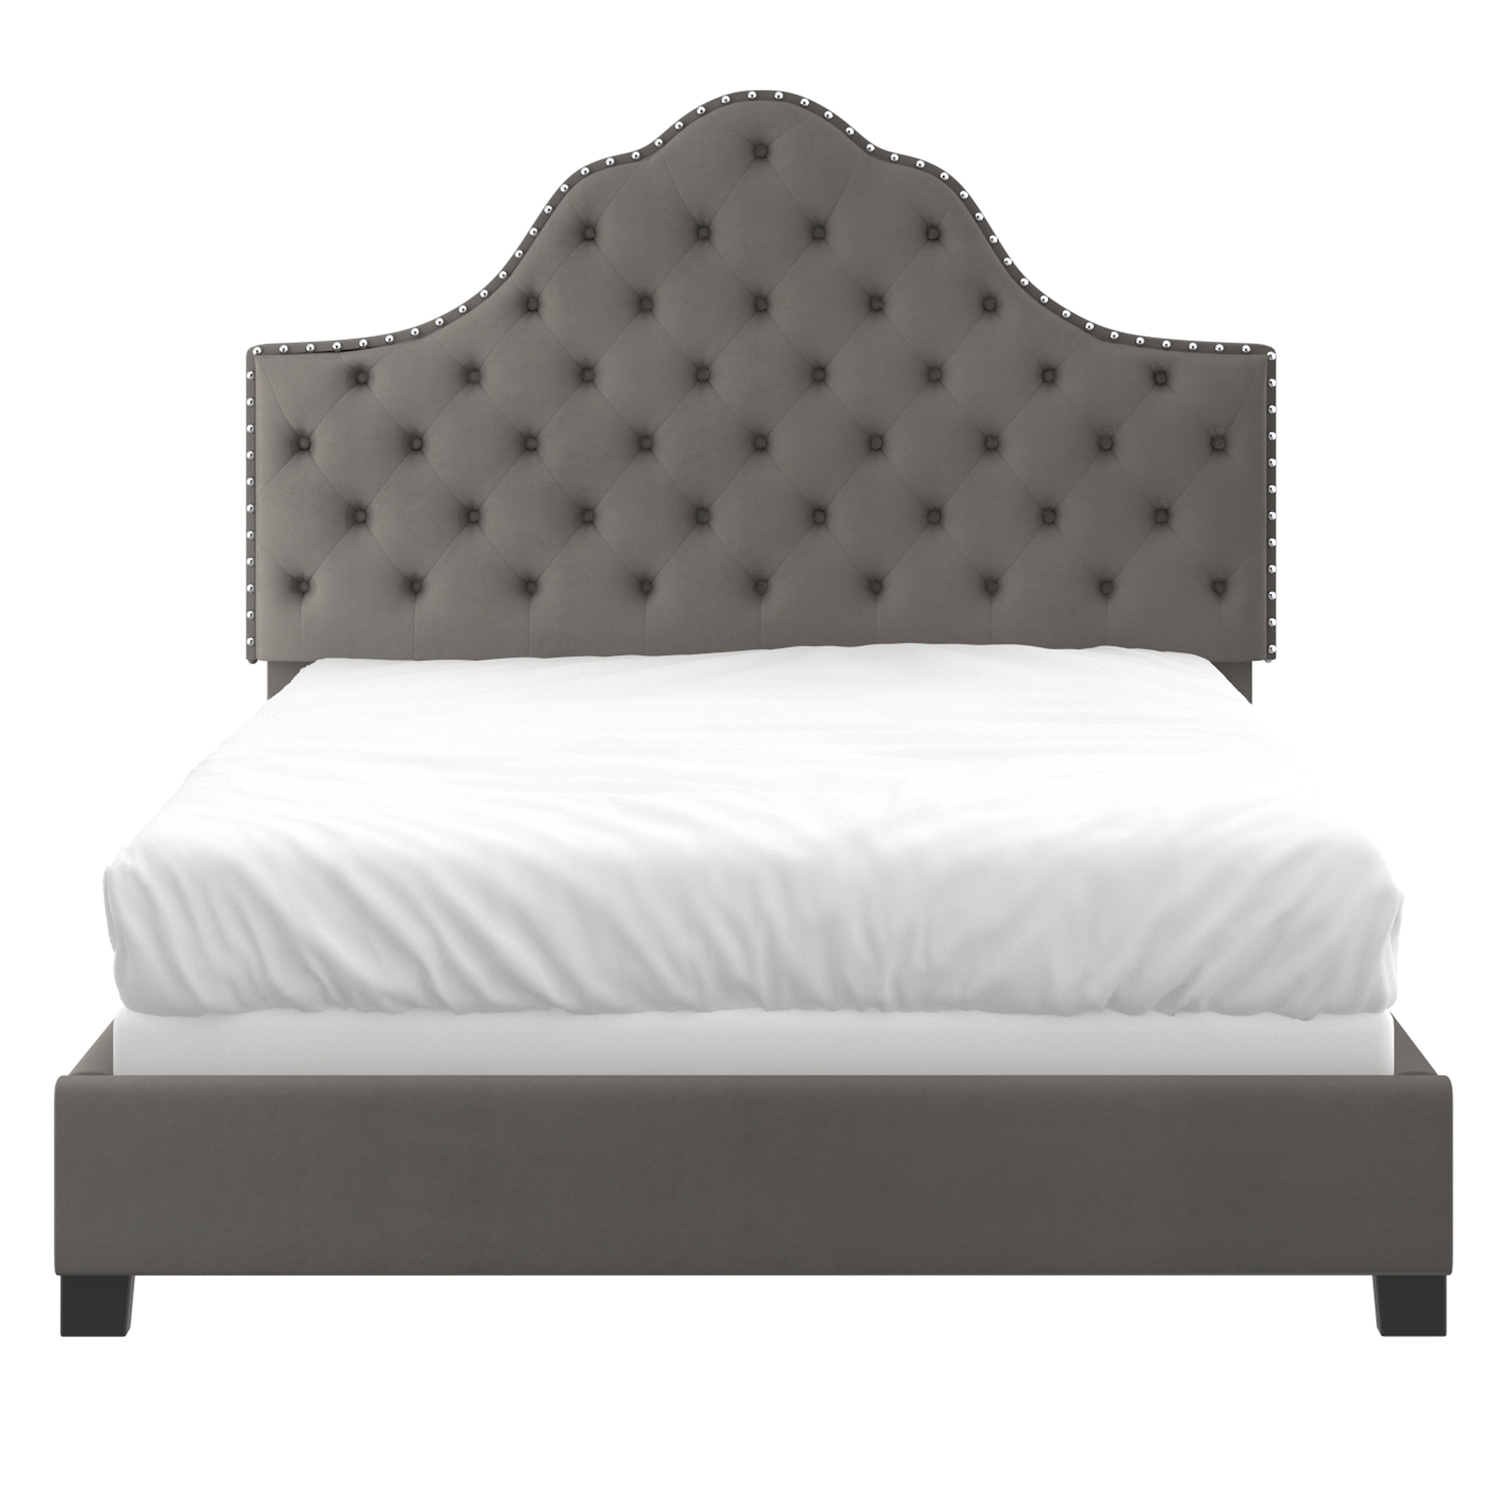 Nspire 101-292Q-GY 60 in. Greta Bed in Grey - Queen Size - image 3 of 6